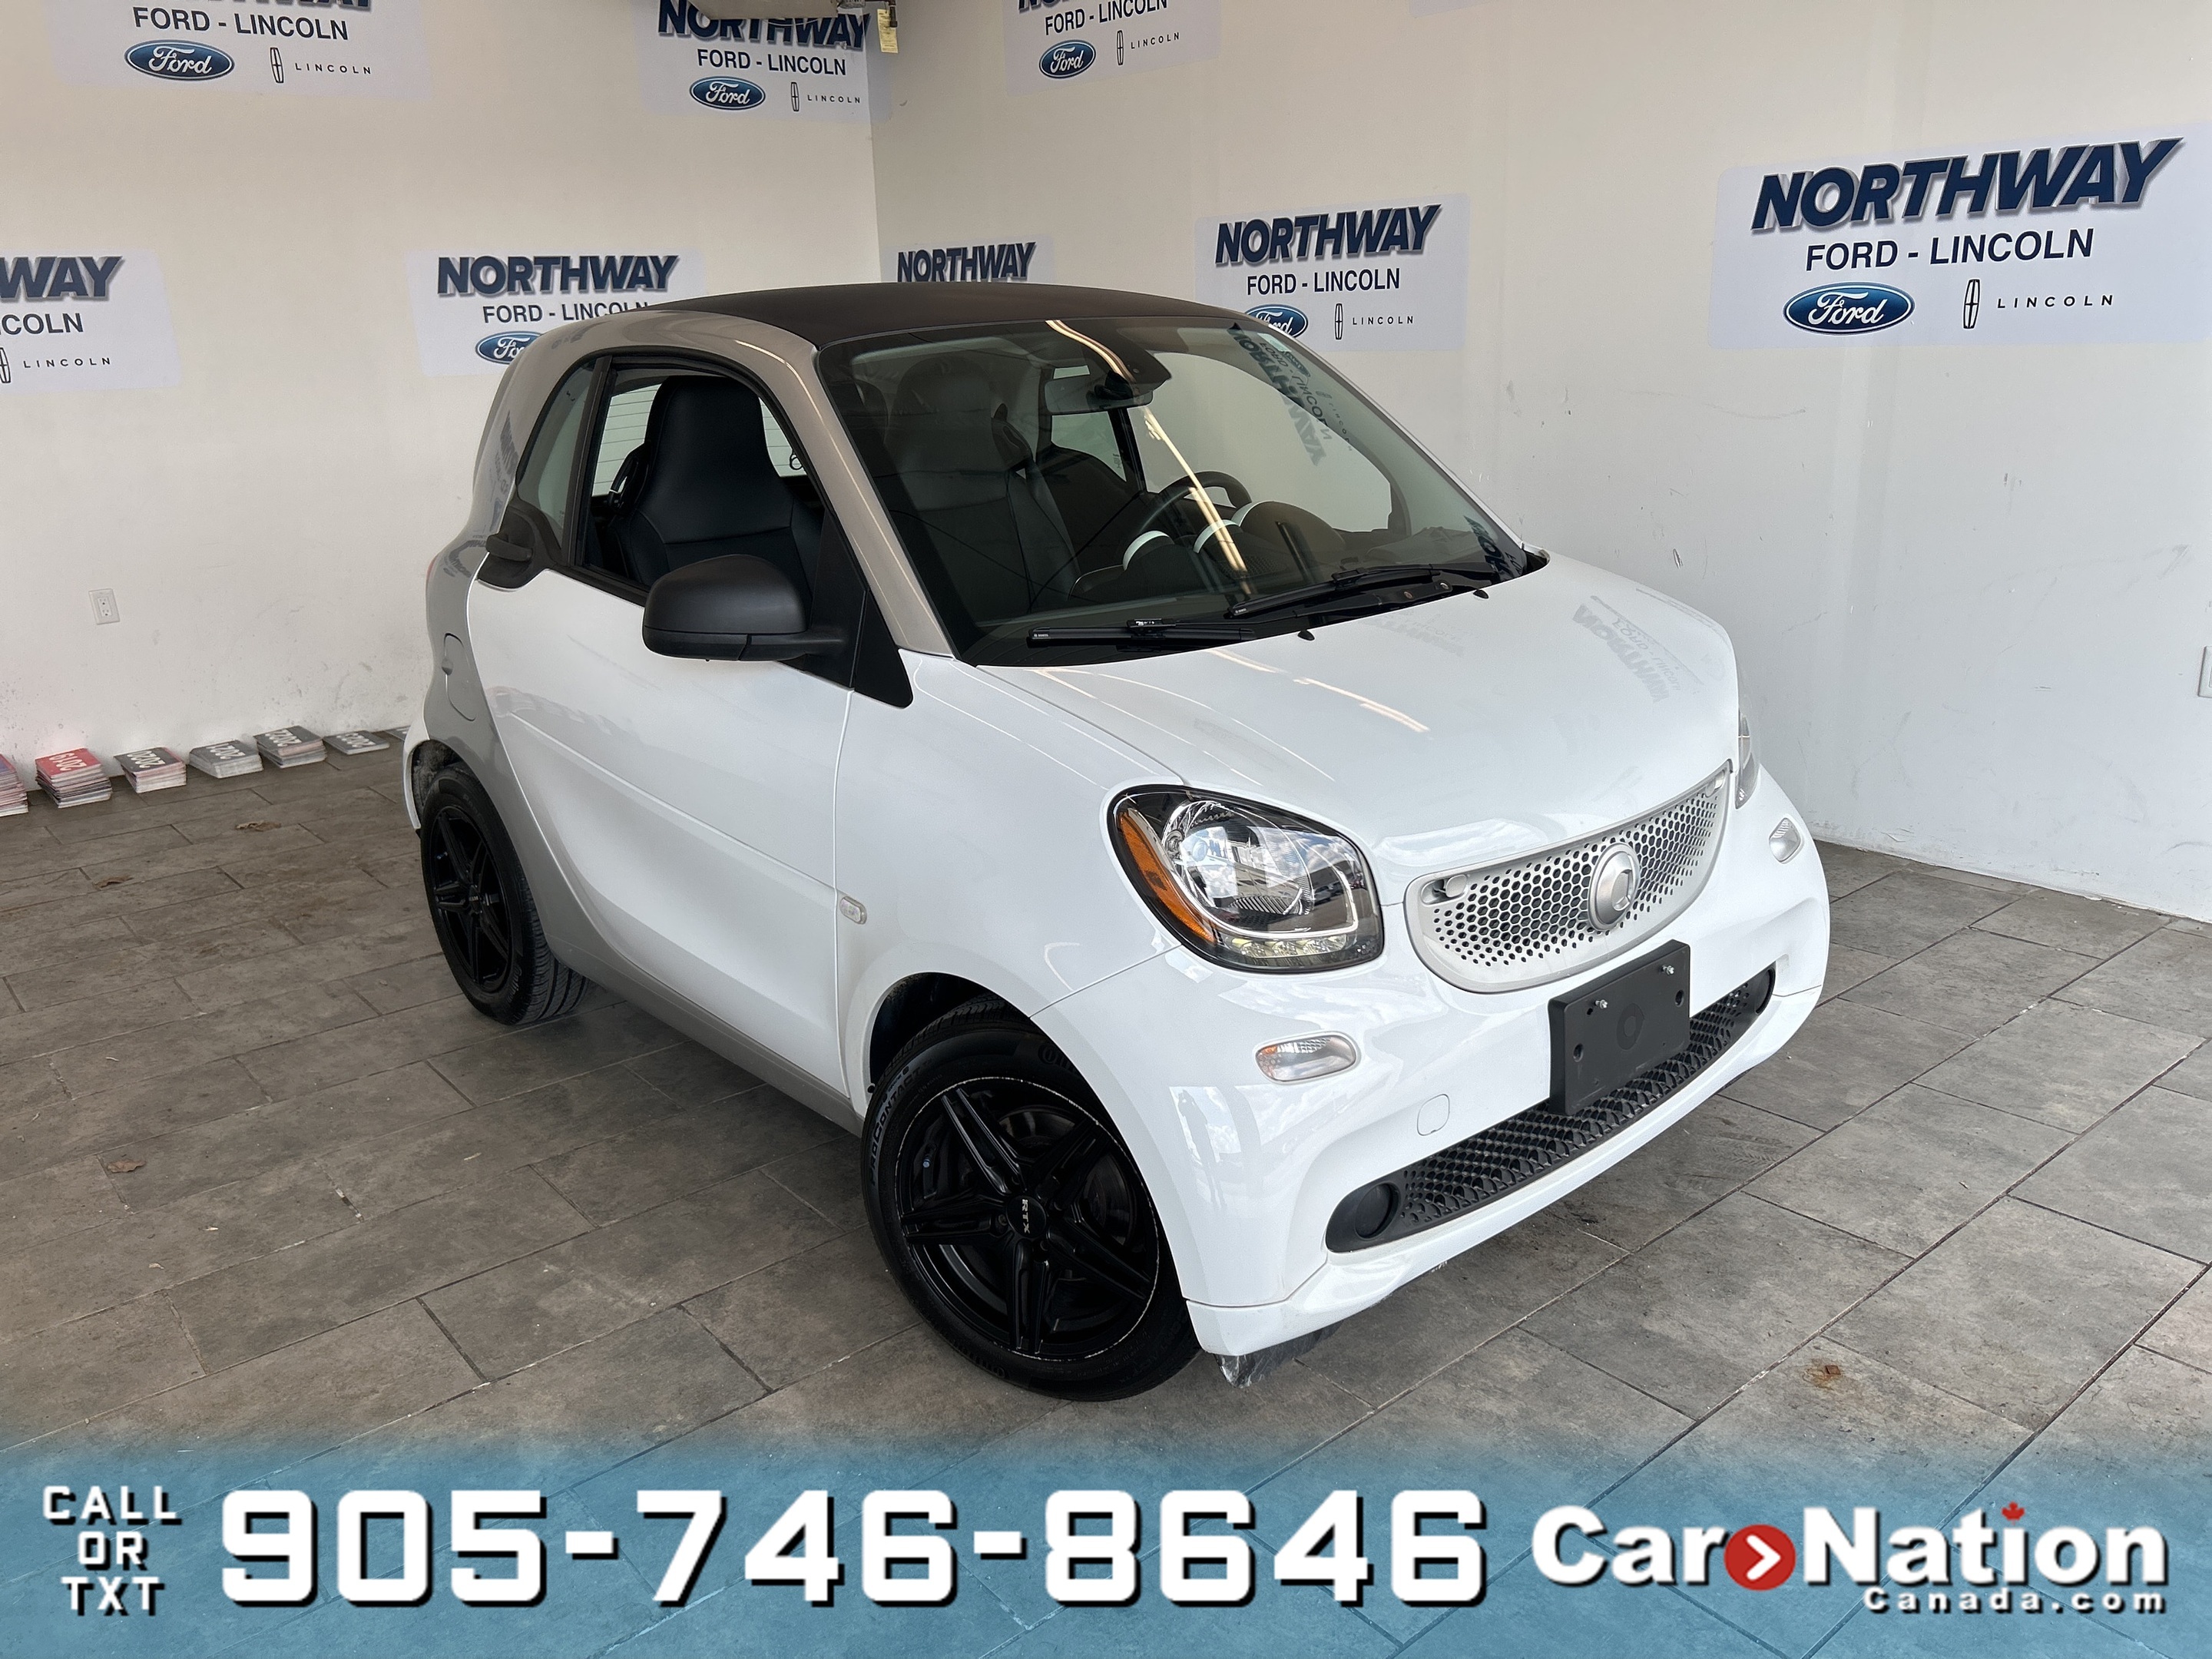 2016 smart fortwo LEATHER | NAVIGATION | ONLY 61,180KM!